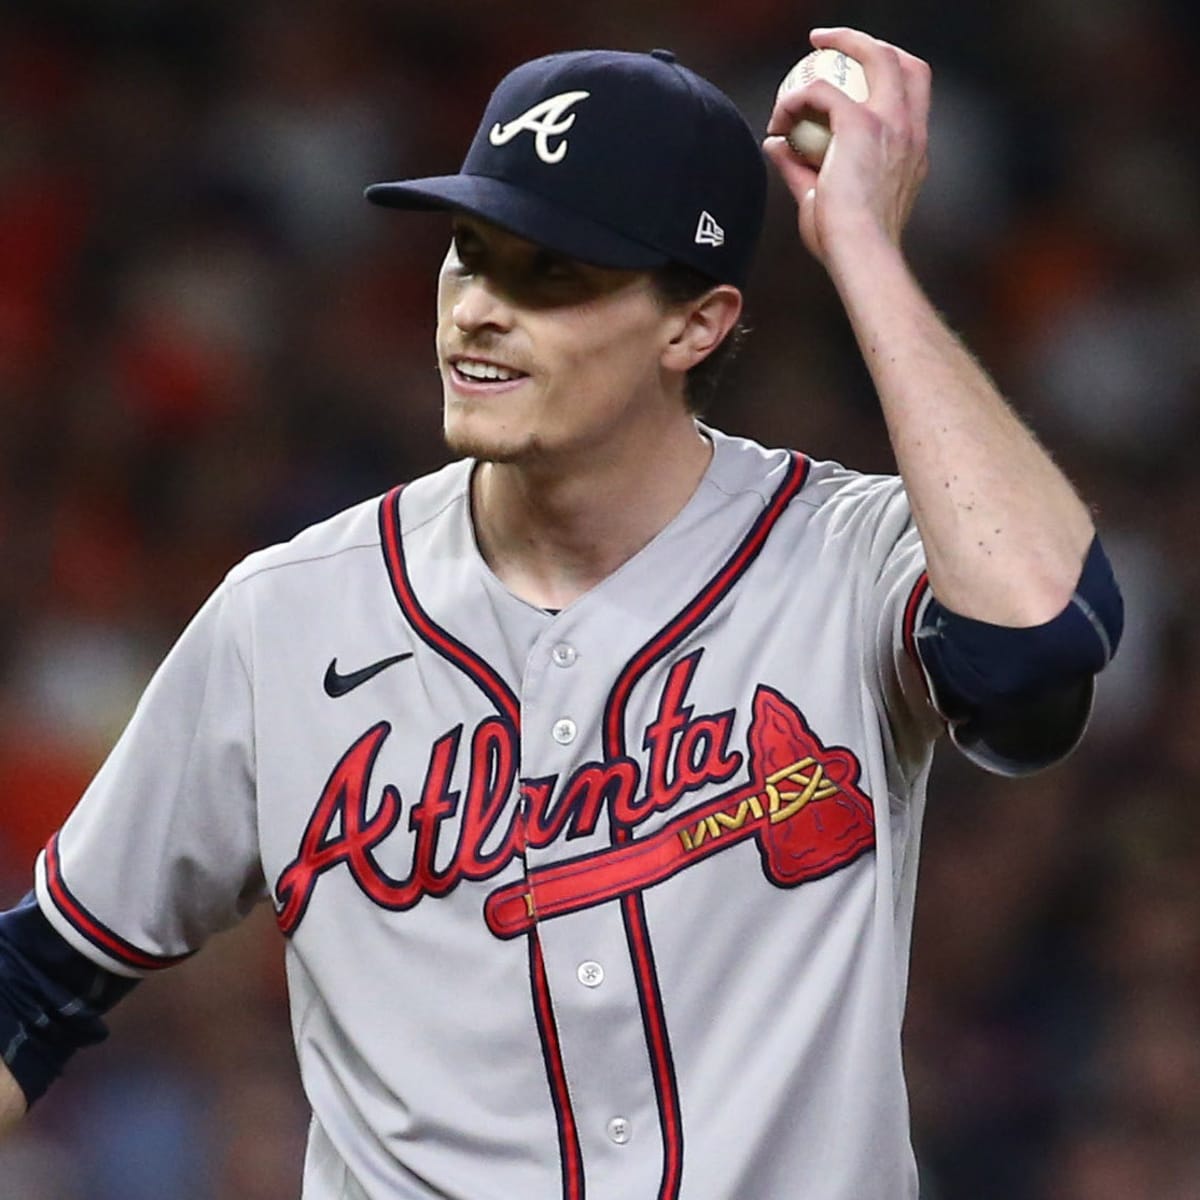 Jewish ace Max Fried wins 3rd straight Gold Glove award for best defensive  pitcher - Jewish Telegraphic Agency